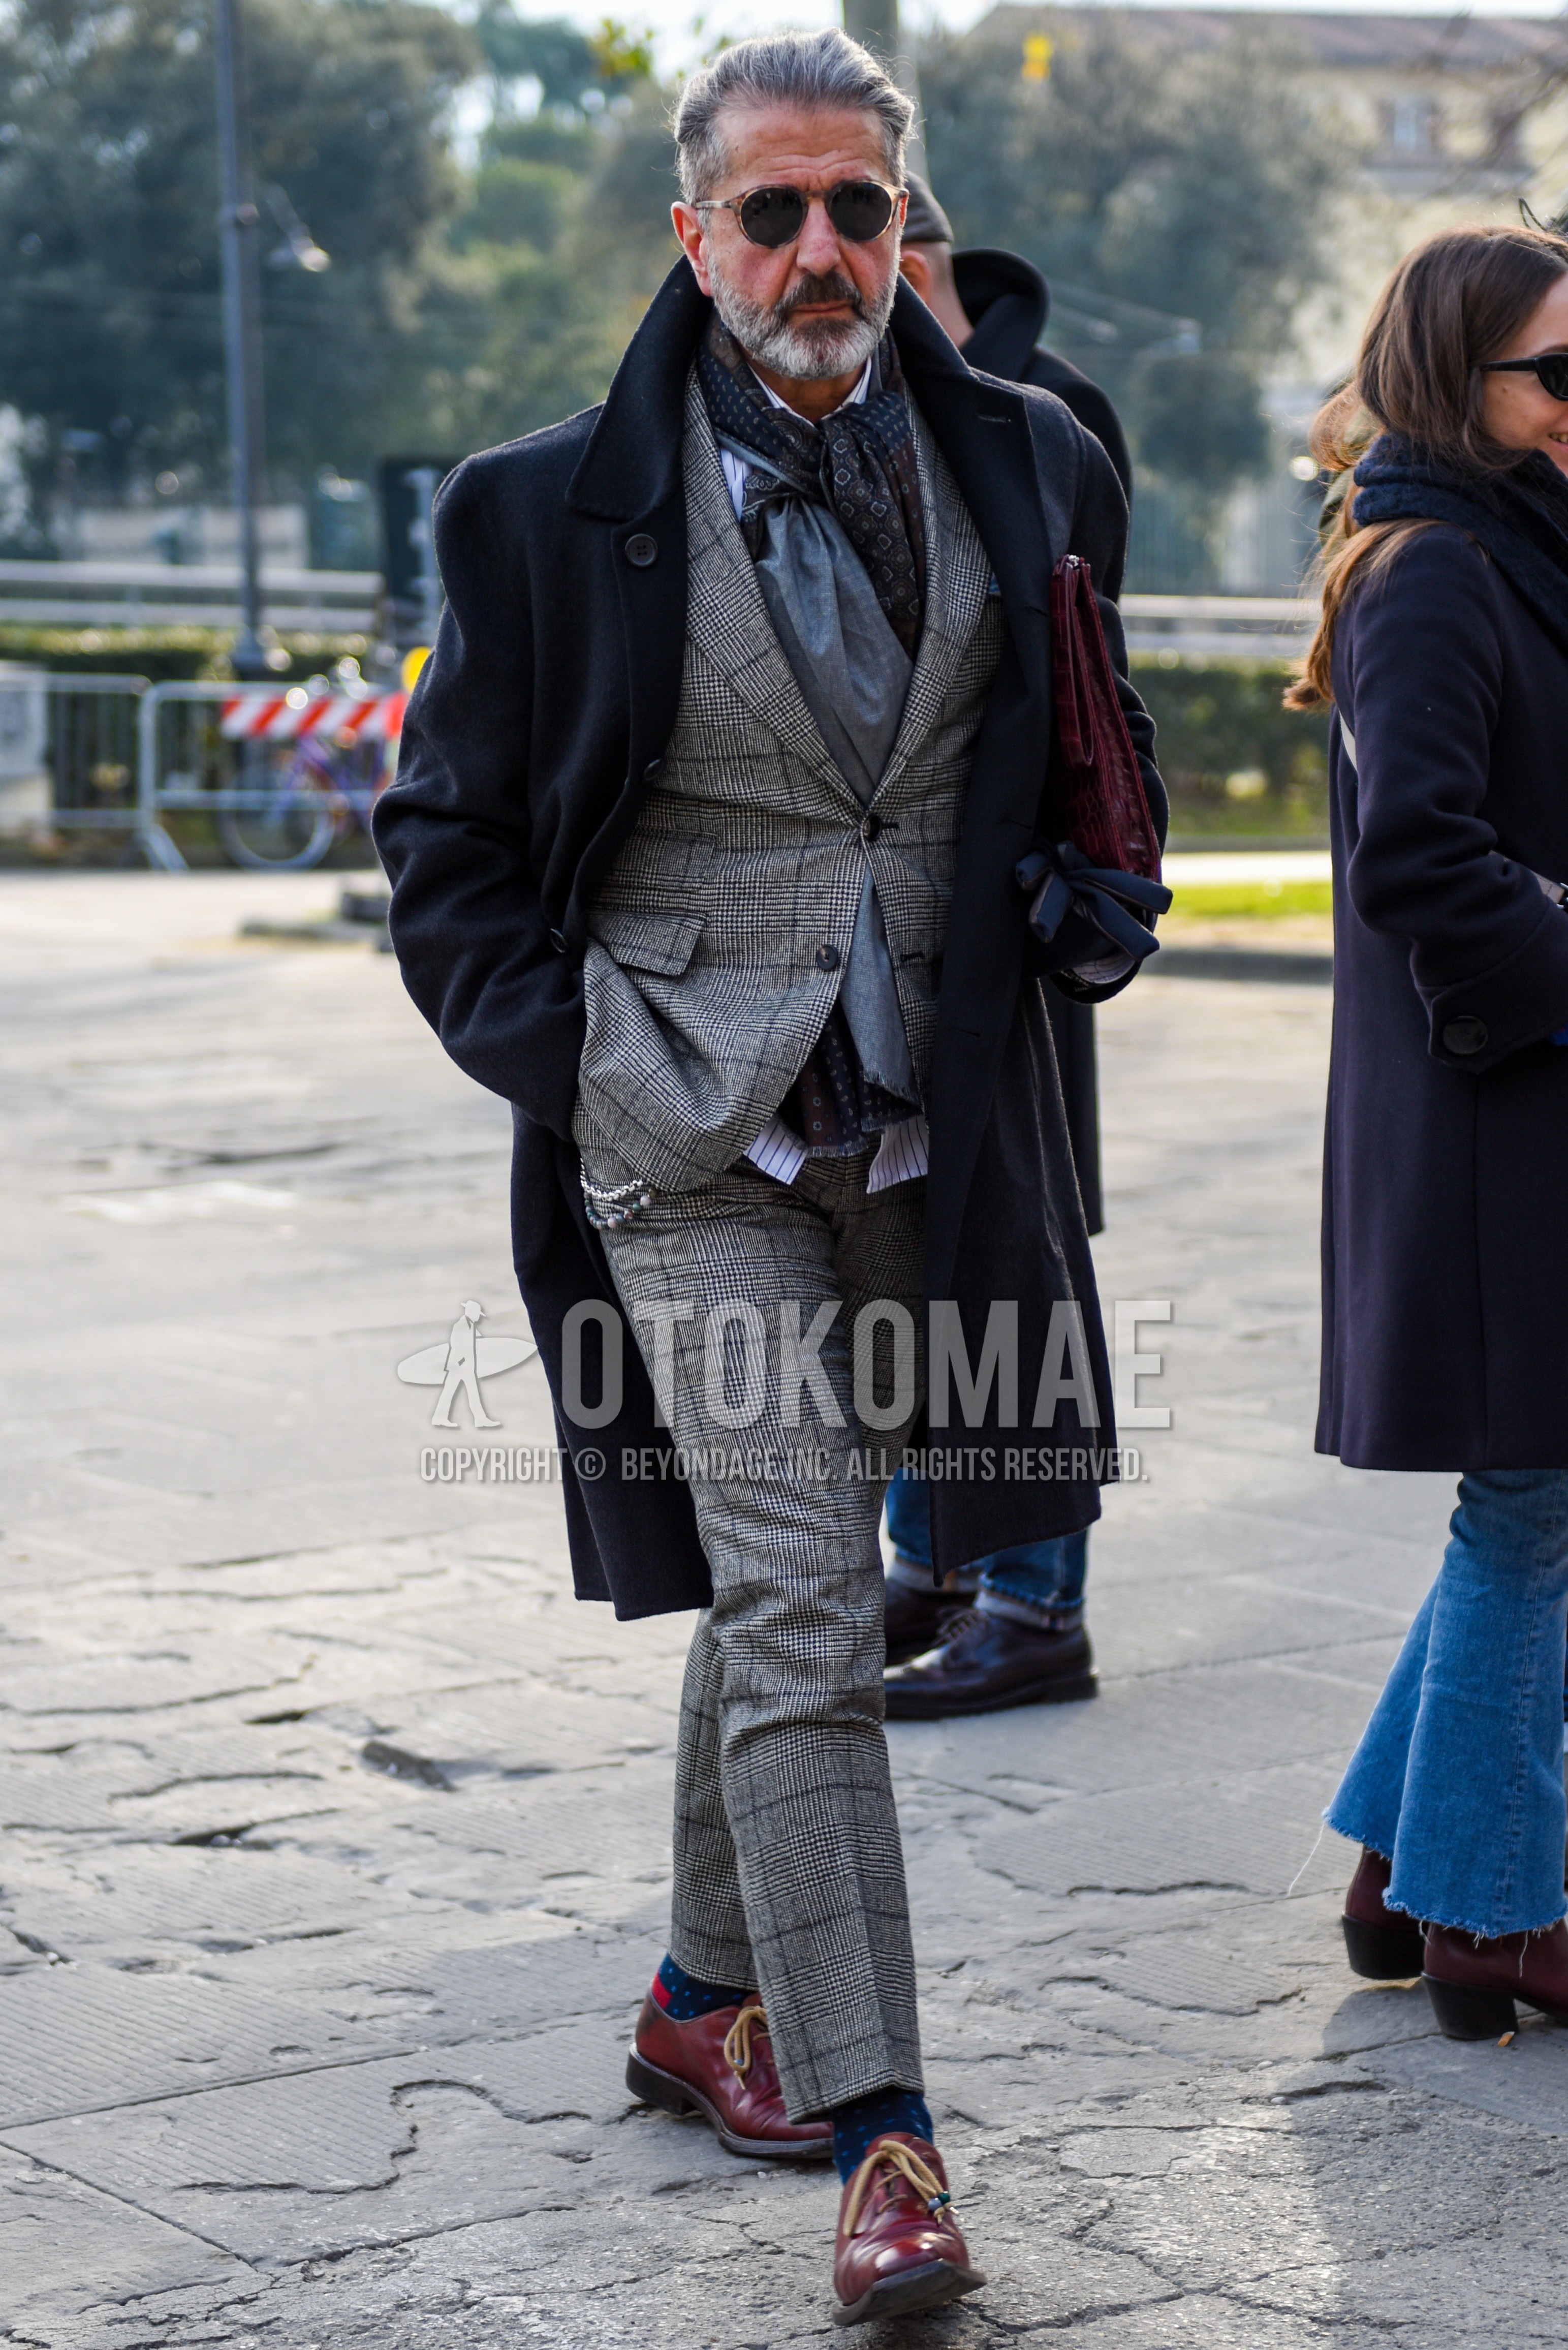 Men's winter outfit with clear plain sunglasses, gray scarf scarf, dark gray plain chester coat, white stripes shirt, blue socks socks, brown straight-tip shoes leather shoes.